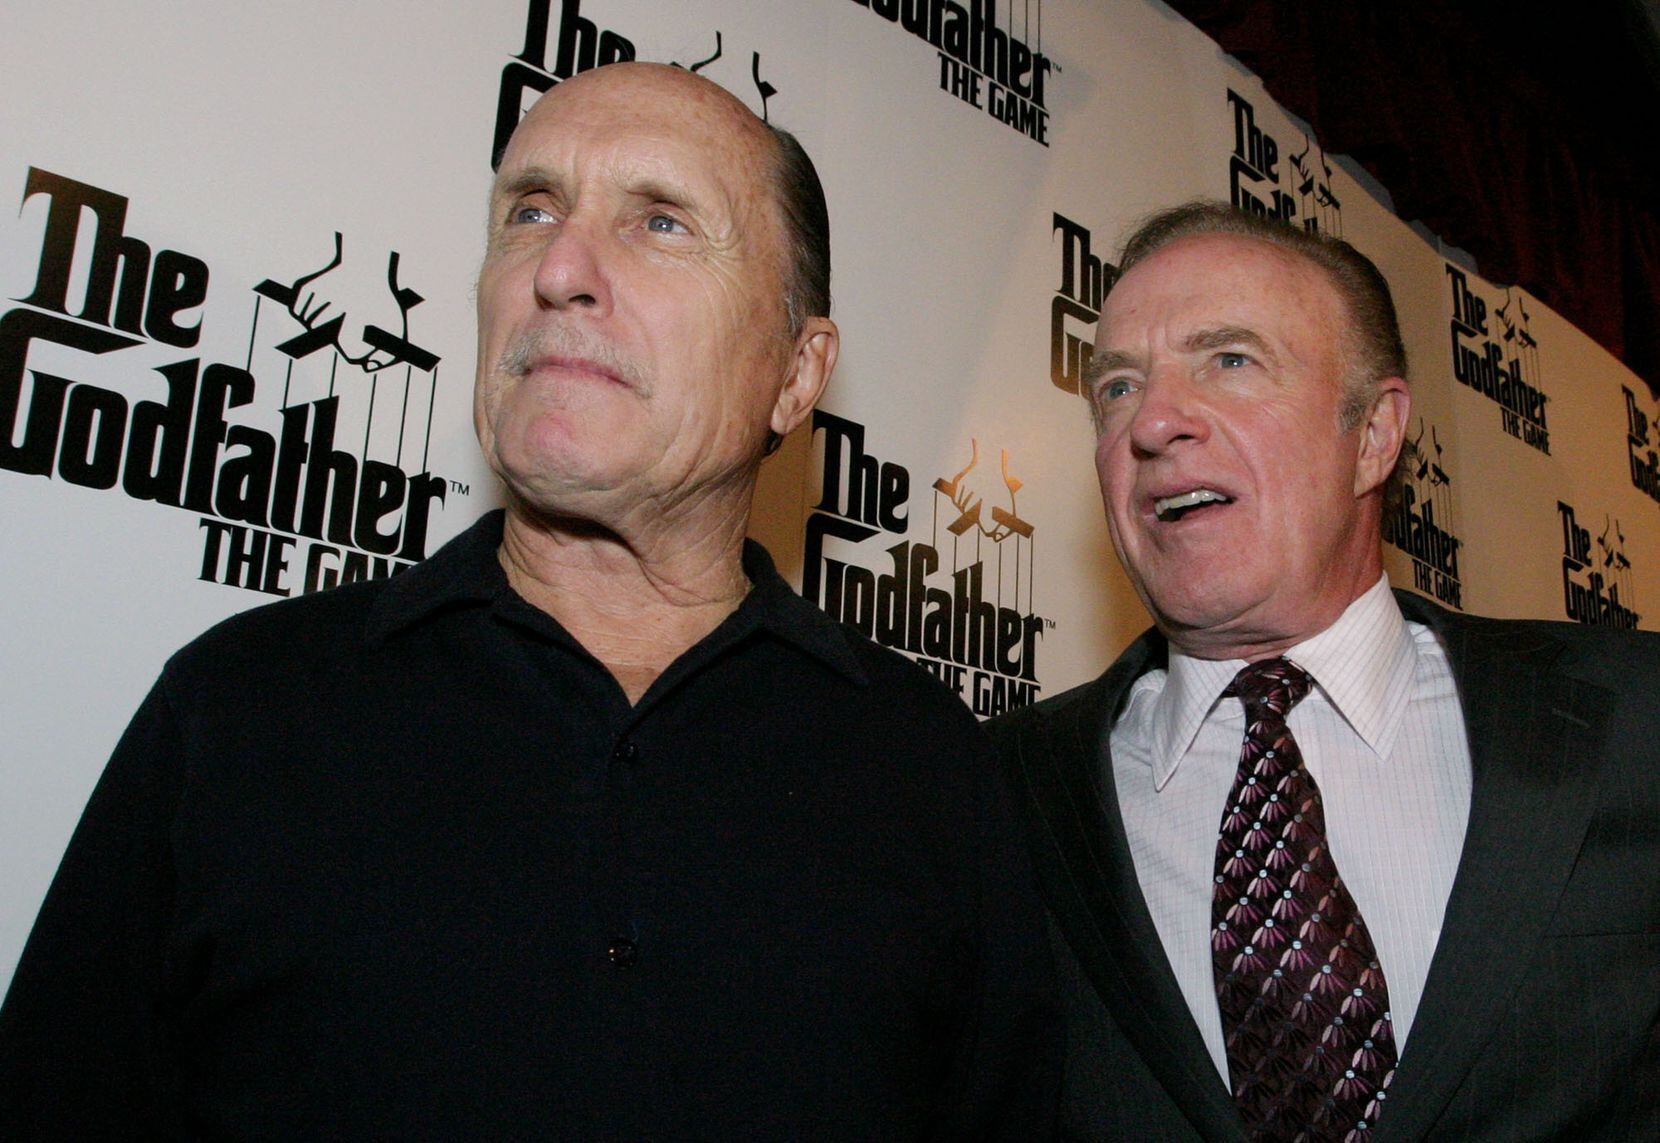 Robert Duvall, left, and James Caan pose for photographers as they arrive at EA Games' launch party for The Godfather video game Thursday, Feb. 10, 2005 in New York.